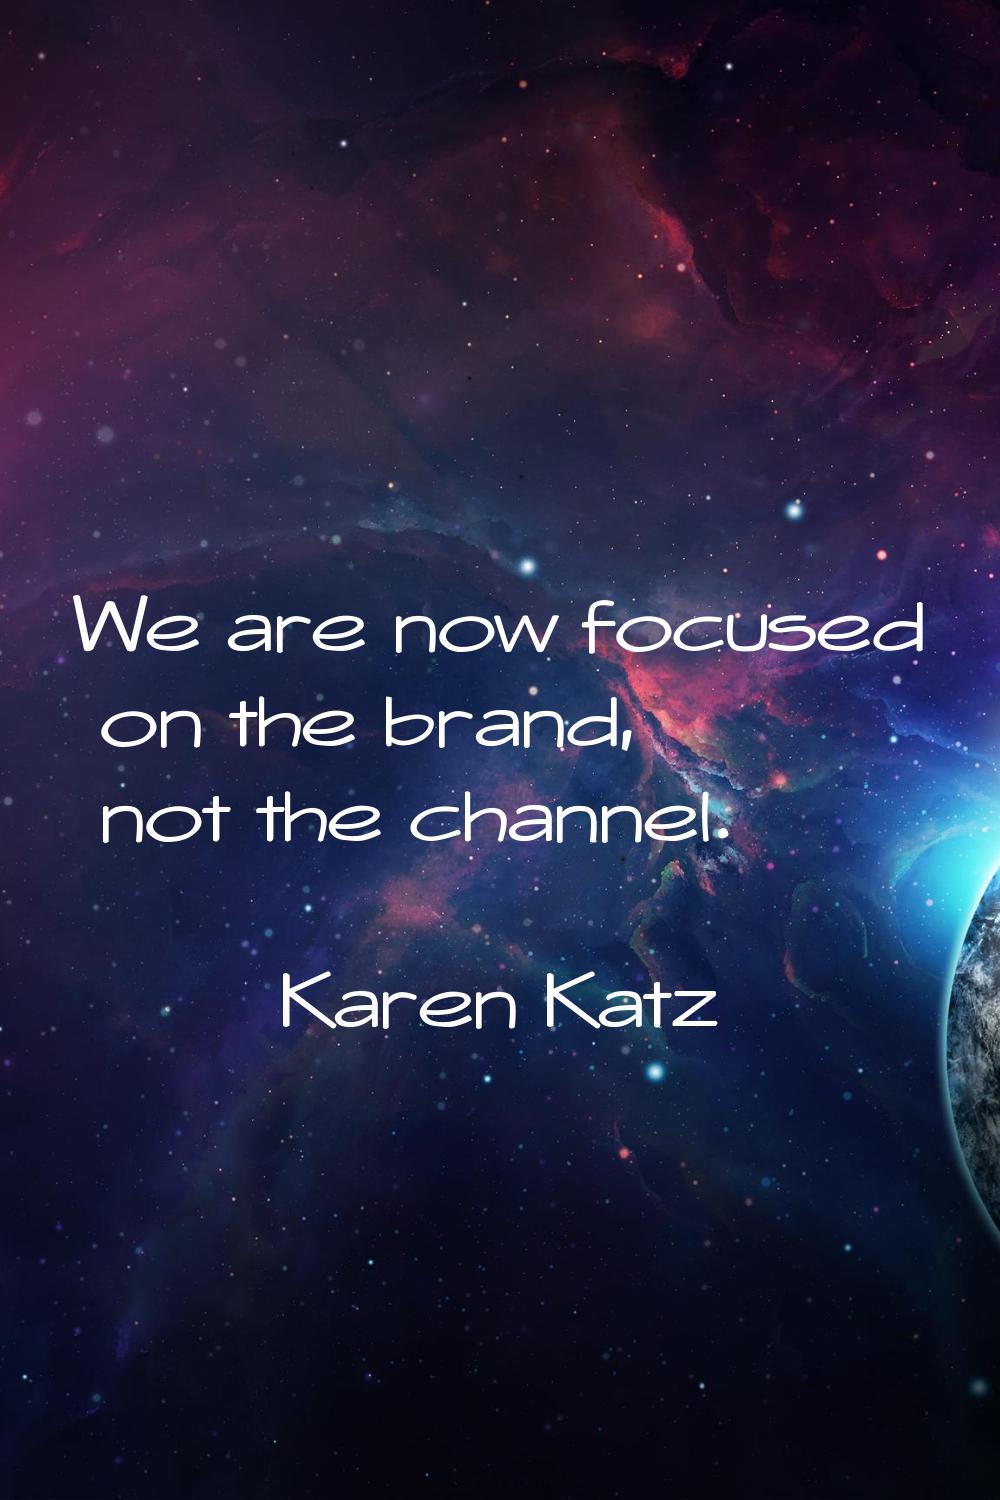 We are now focused on the brand, not the channel.